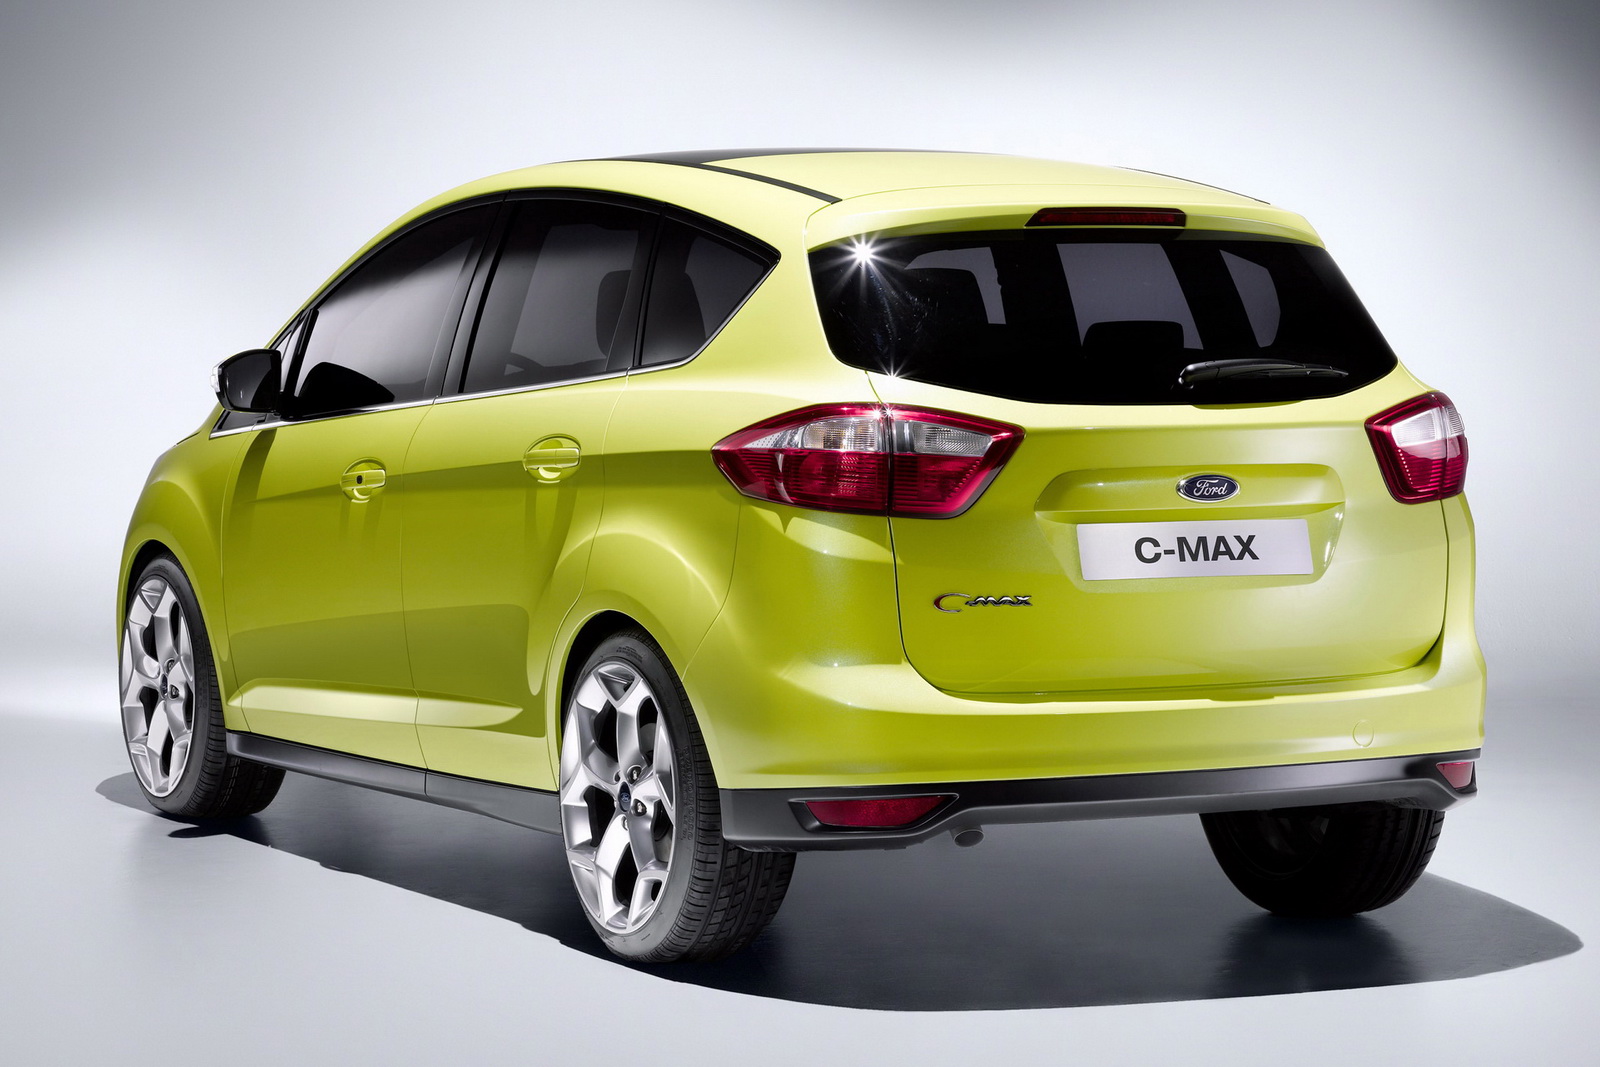 Ford C-MAX 2010 - Rear Angle View